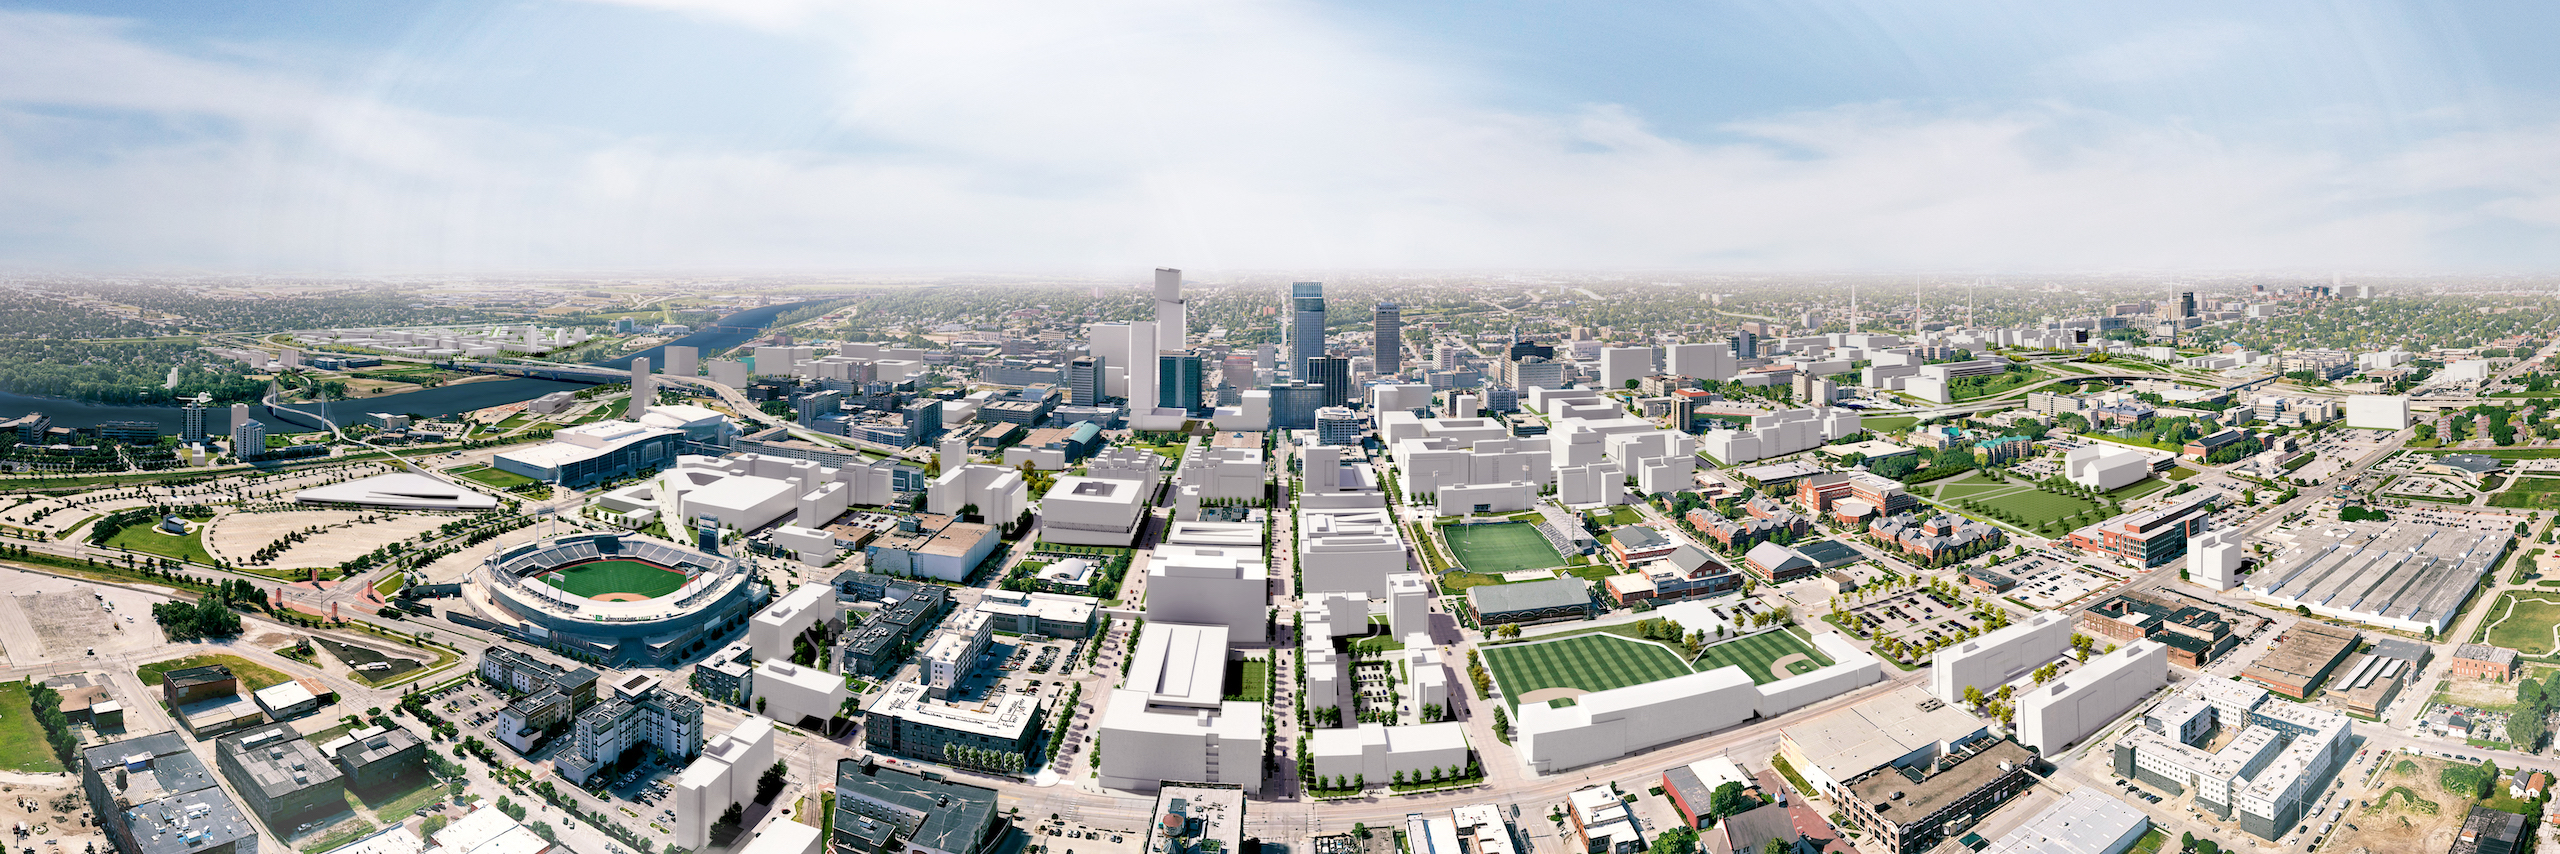 Photo-real rendering of the future Omaha downtown, including prospective development projects.